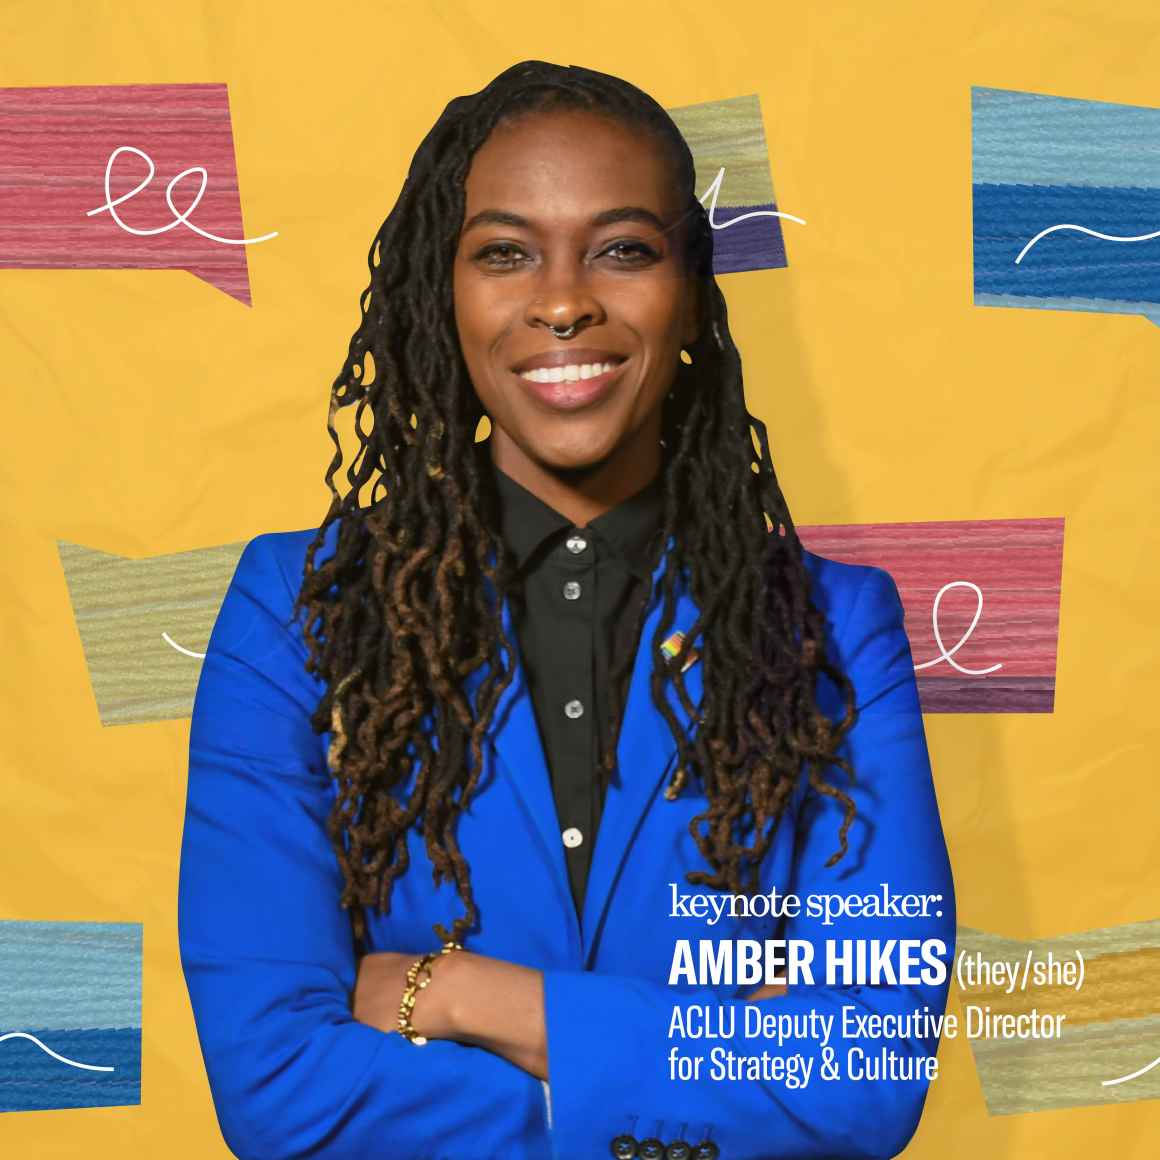 Yellow background with speech graphics in various colors. Image of Amber Hikes wearing a bright blue blazer and black shirt.